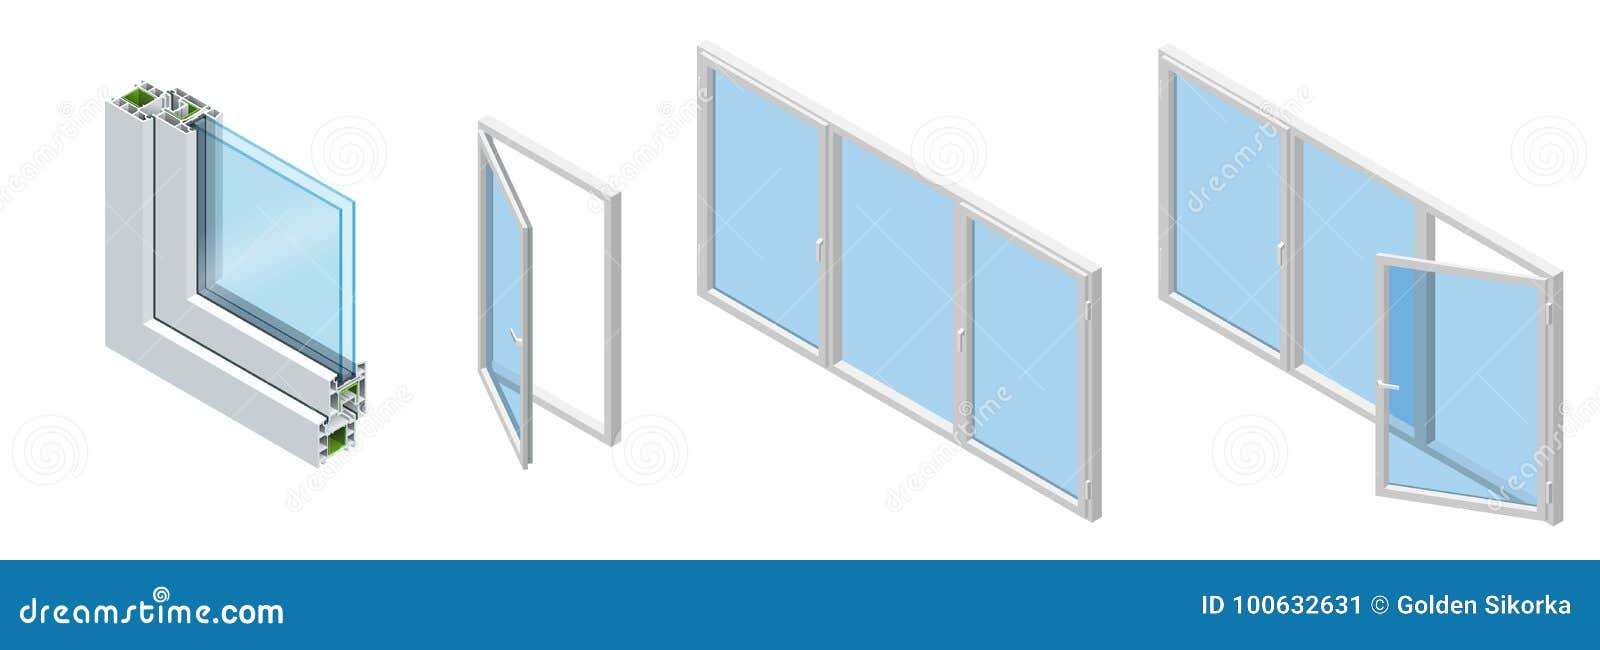 isometric cross section through a window pane pvc profile laminated wood grain, classic white. set of cross-section